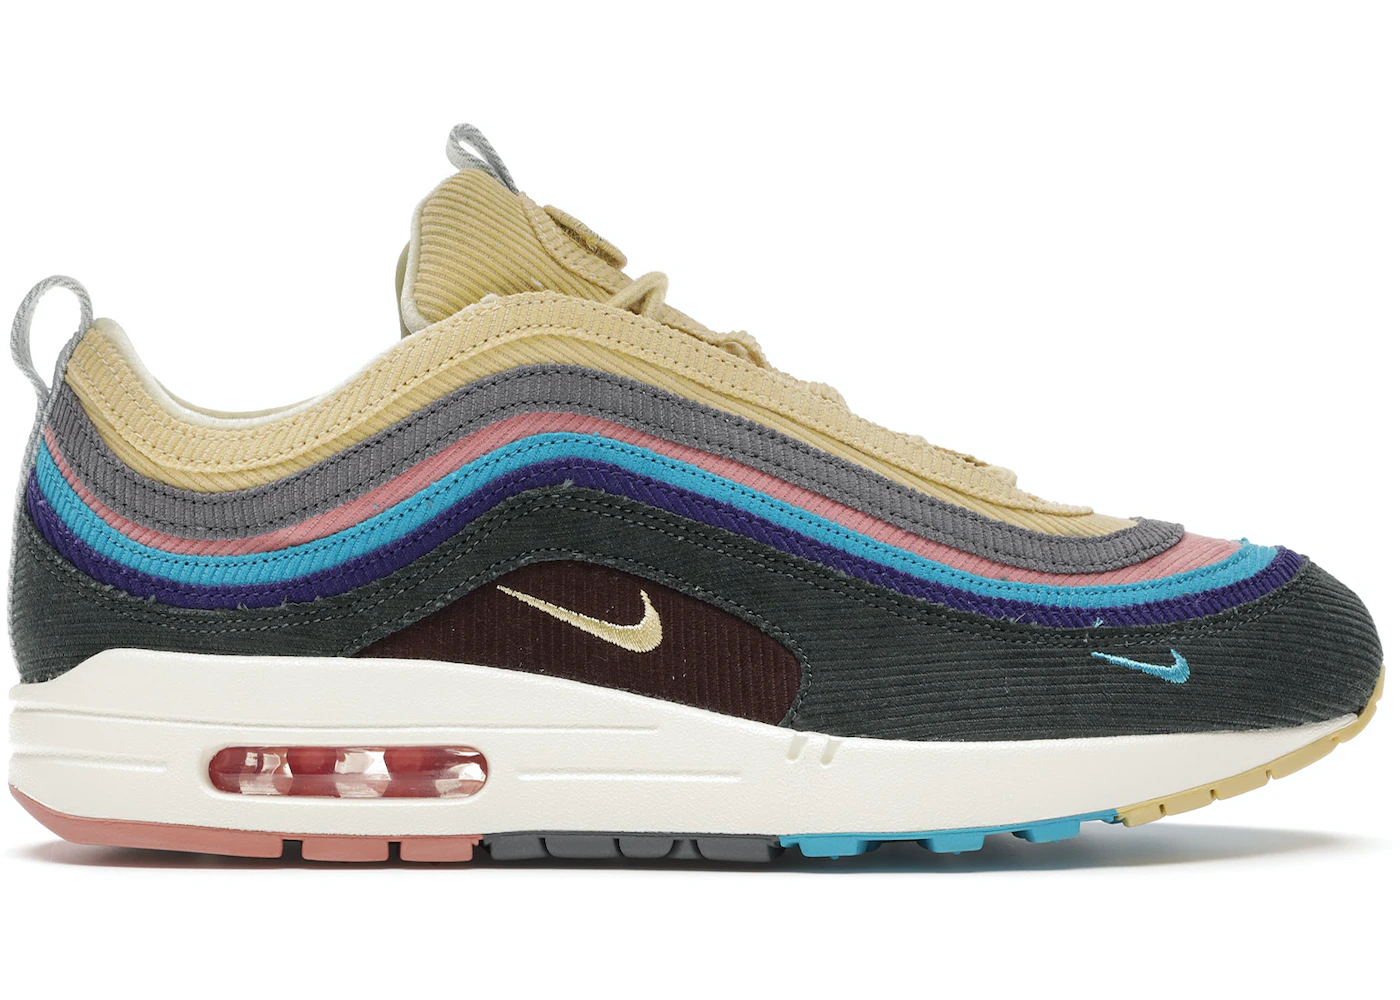 Admission fee sunflower Without Nike Air Max 1/97 Sean Wotherspoon (All Accessories and Dustbag) -  AJ4219-400 - US